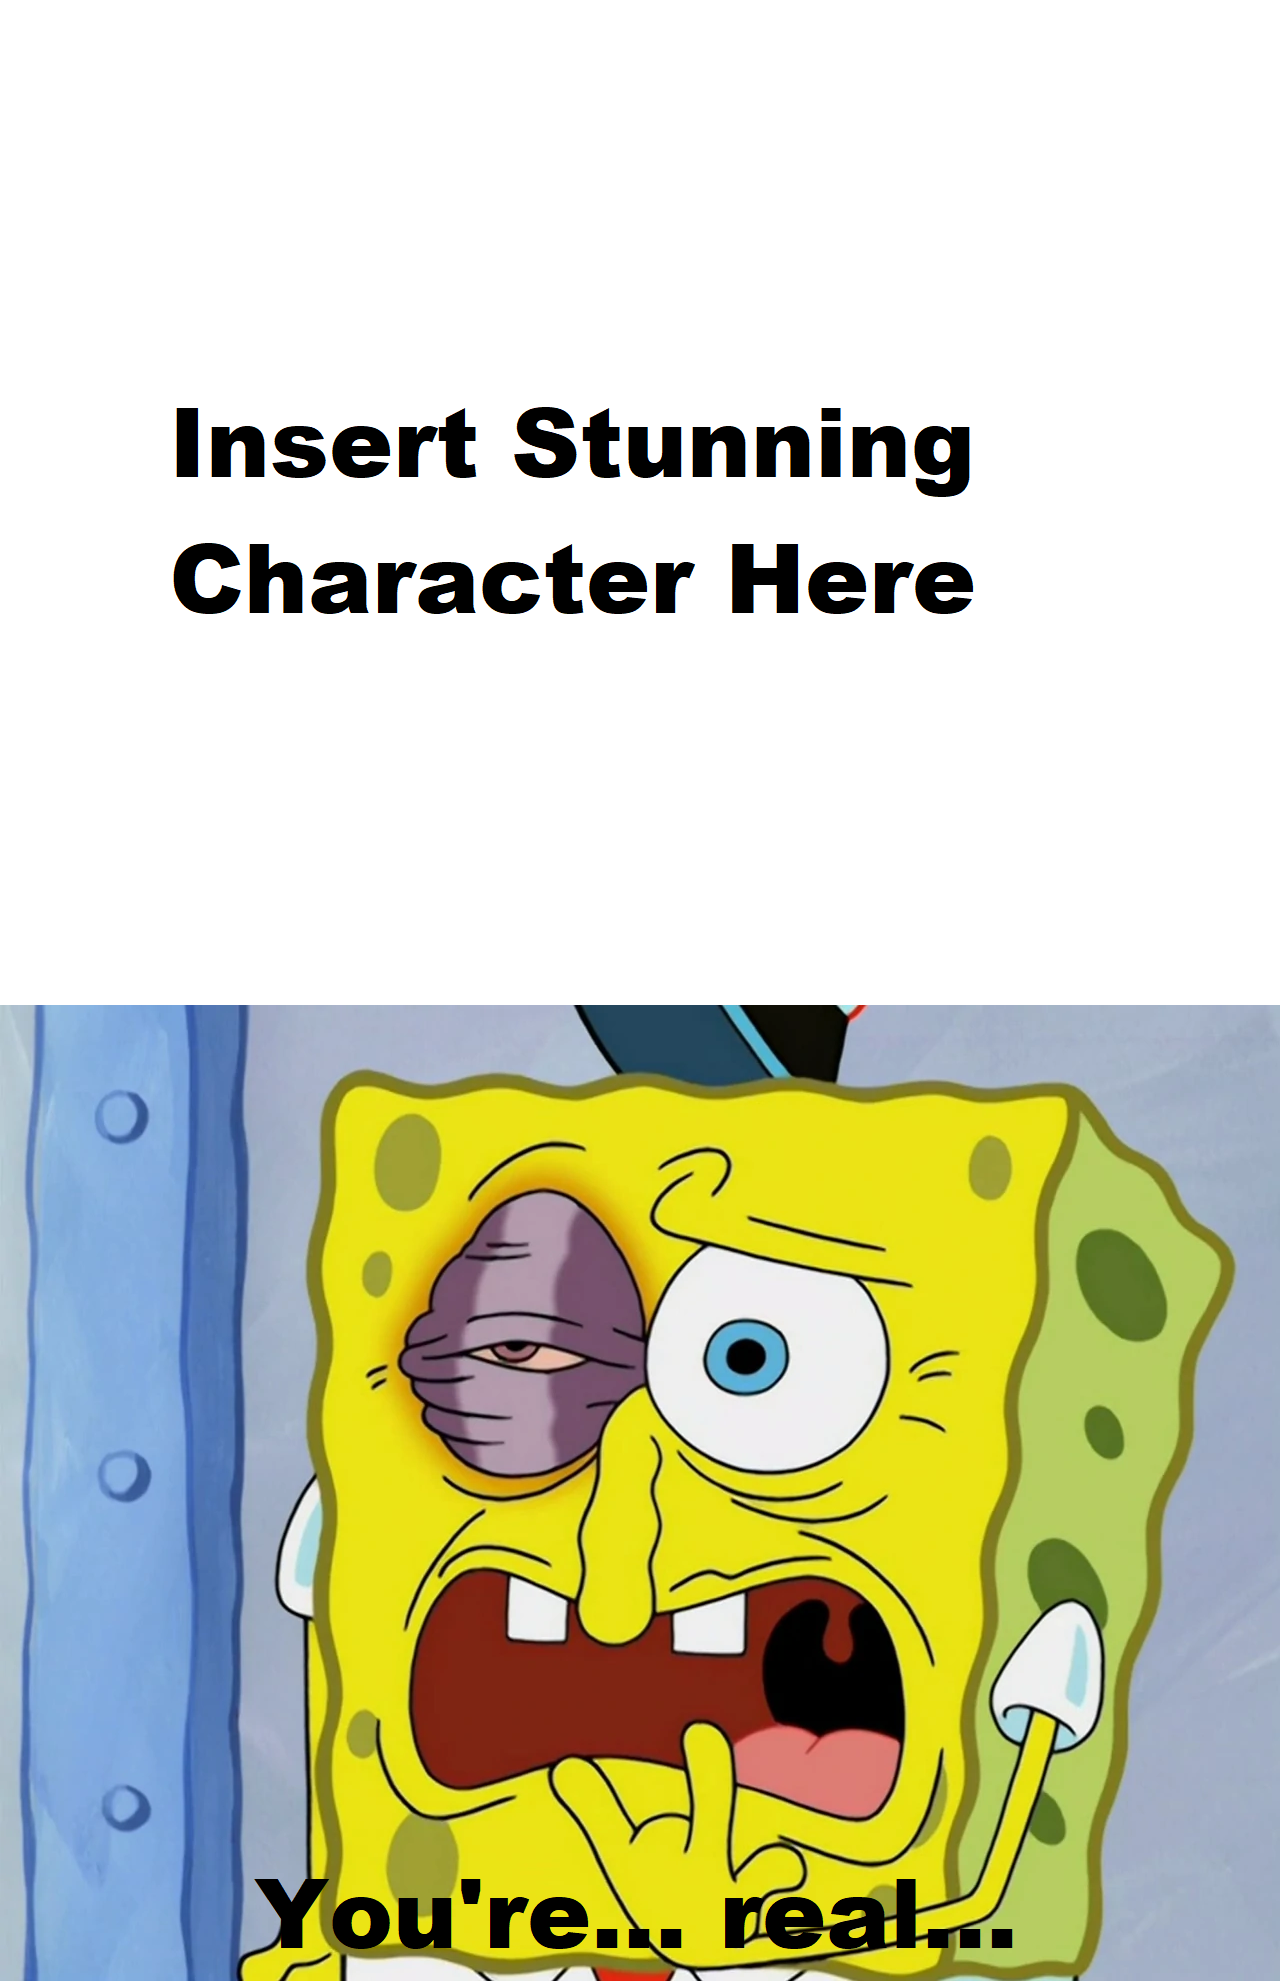 Put text or image over Spongebob's face, and text under property and you're  golden. : r/MemeTemplatesOfficial